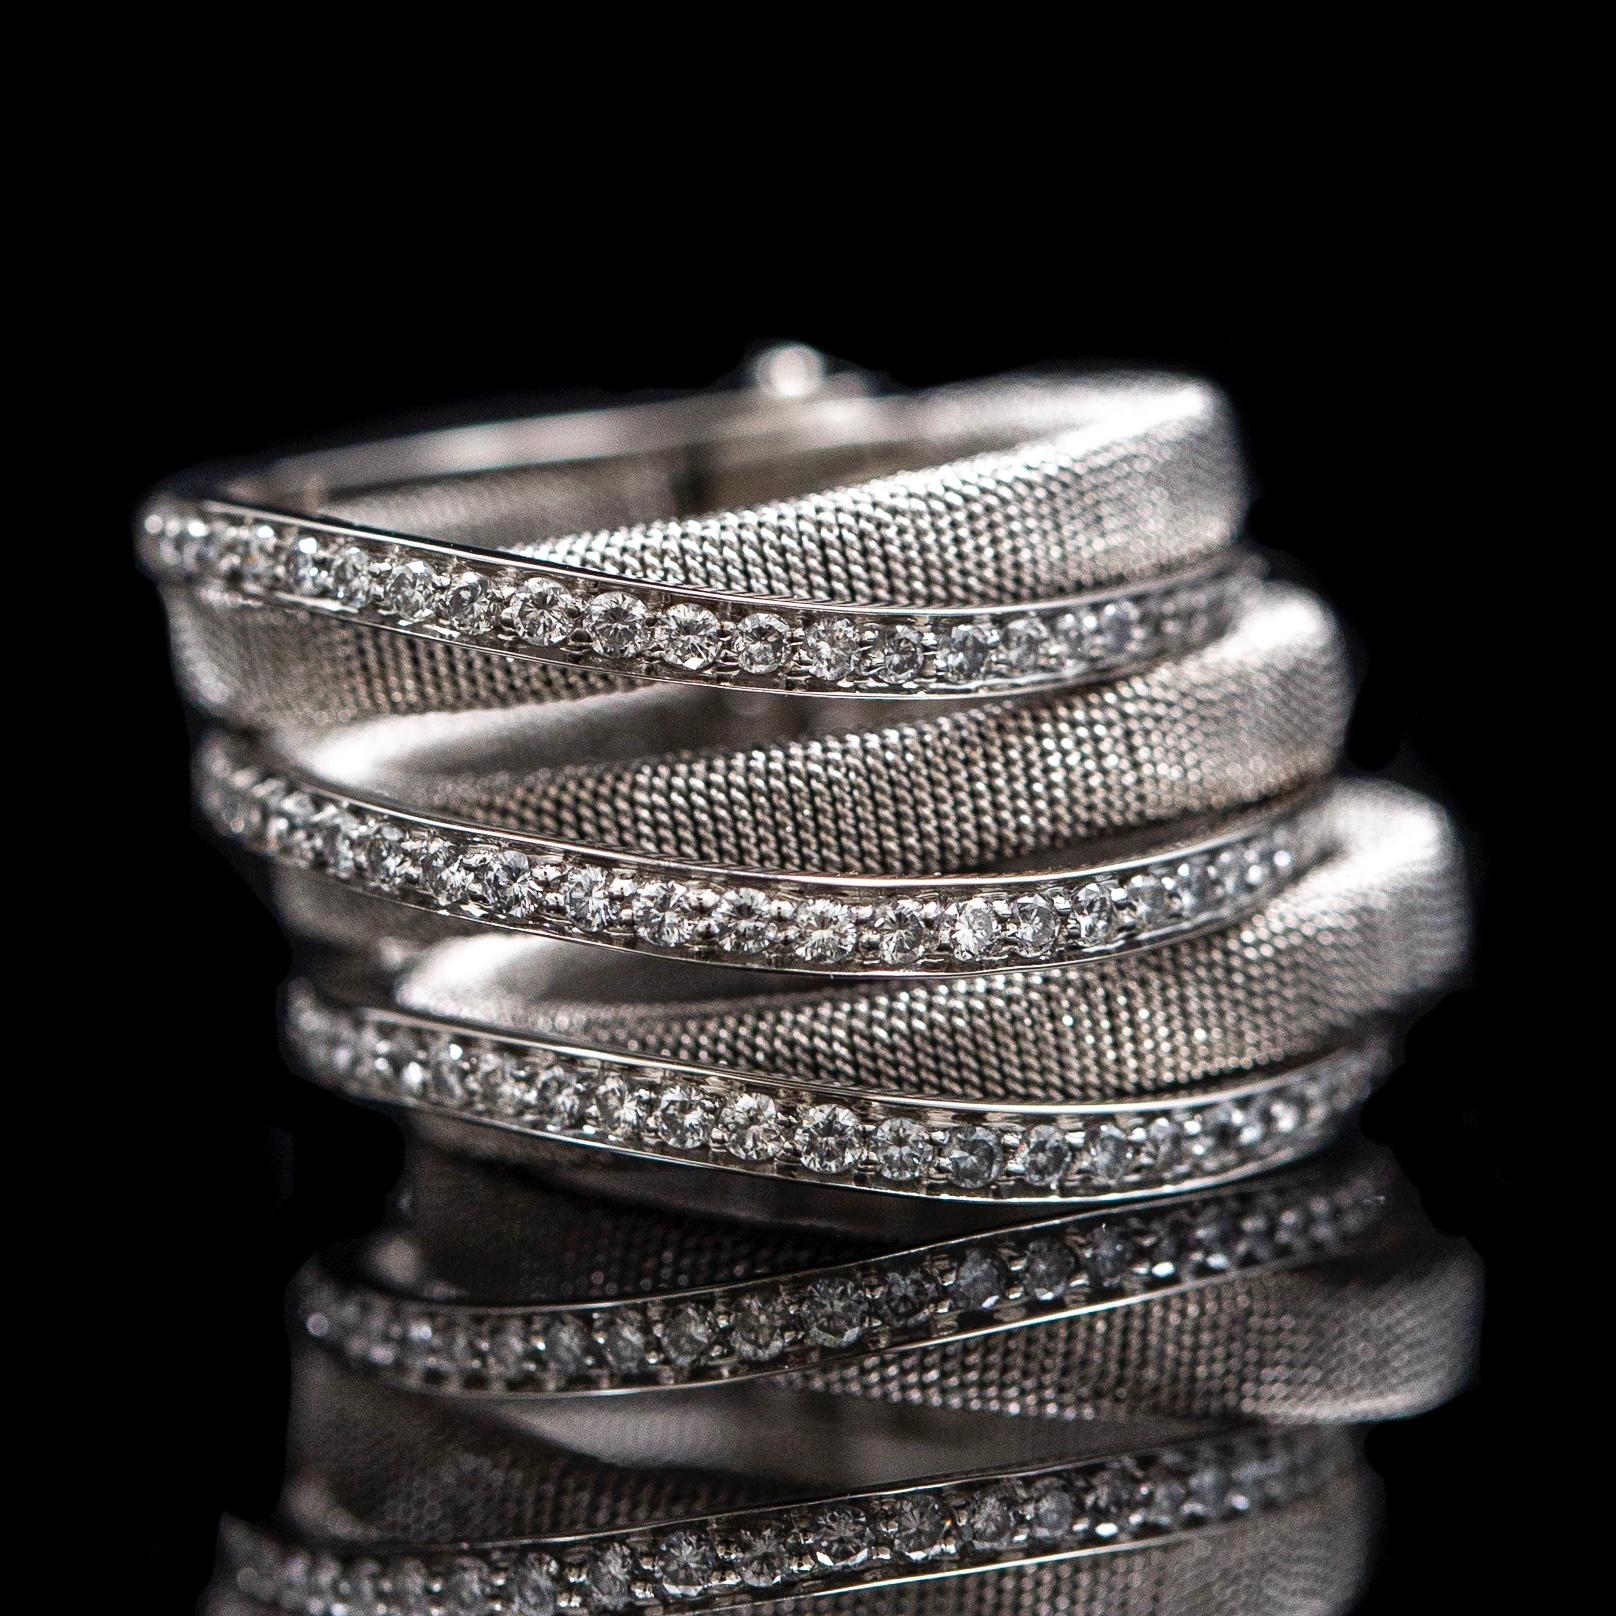 Harpo’s Italy multi-shank articulated diamond cocktail ring in 18kt white gold, late 20th / early 21st century. This jewel is composed by three rectangular shanks covered with white gold wirework decoration alternating with three polished white gold